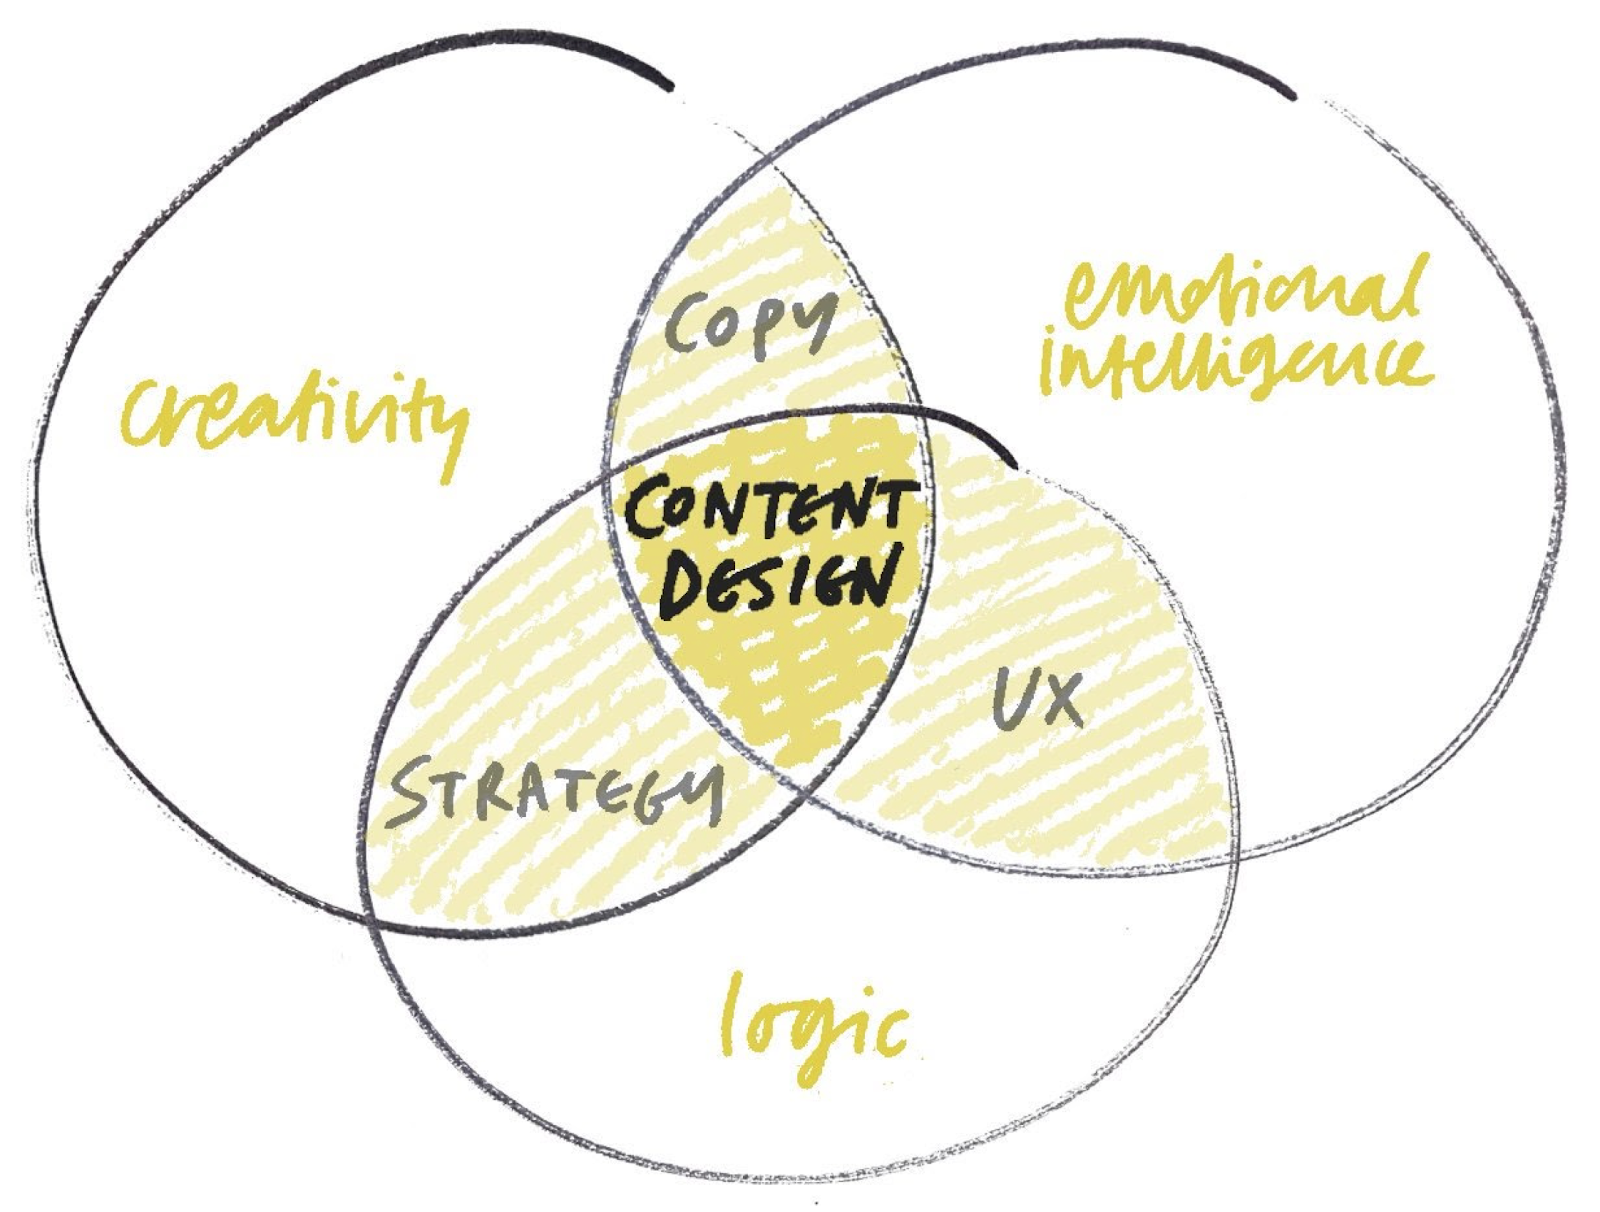 A venn diagram with 3 overlapping circles. The words "Content design" sit in the middle of all the circles. In each circle, there is 1 word. Creativity, Logic and Emotional Intelligence. In the secondary overlapping sections, there are the words, strategy, UX and copy.